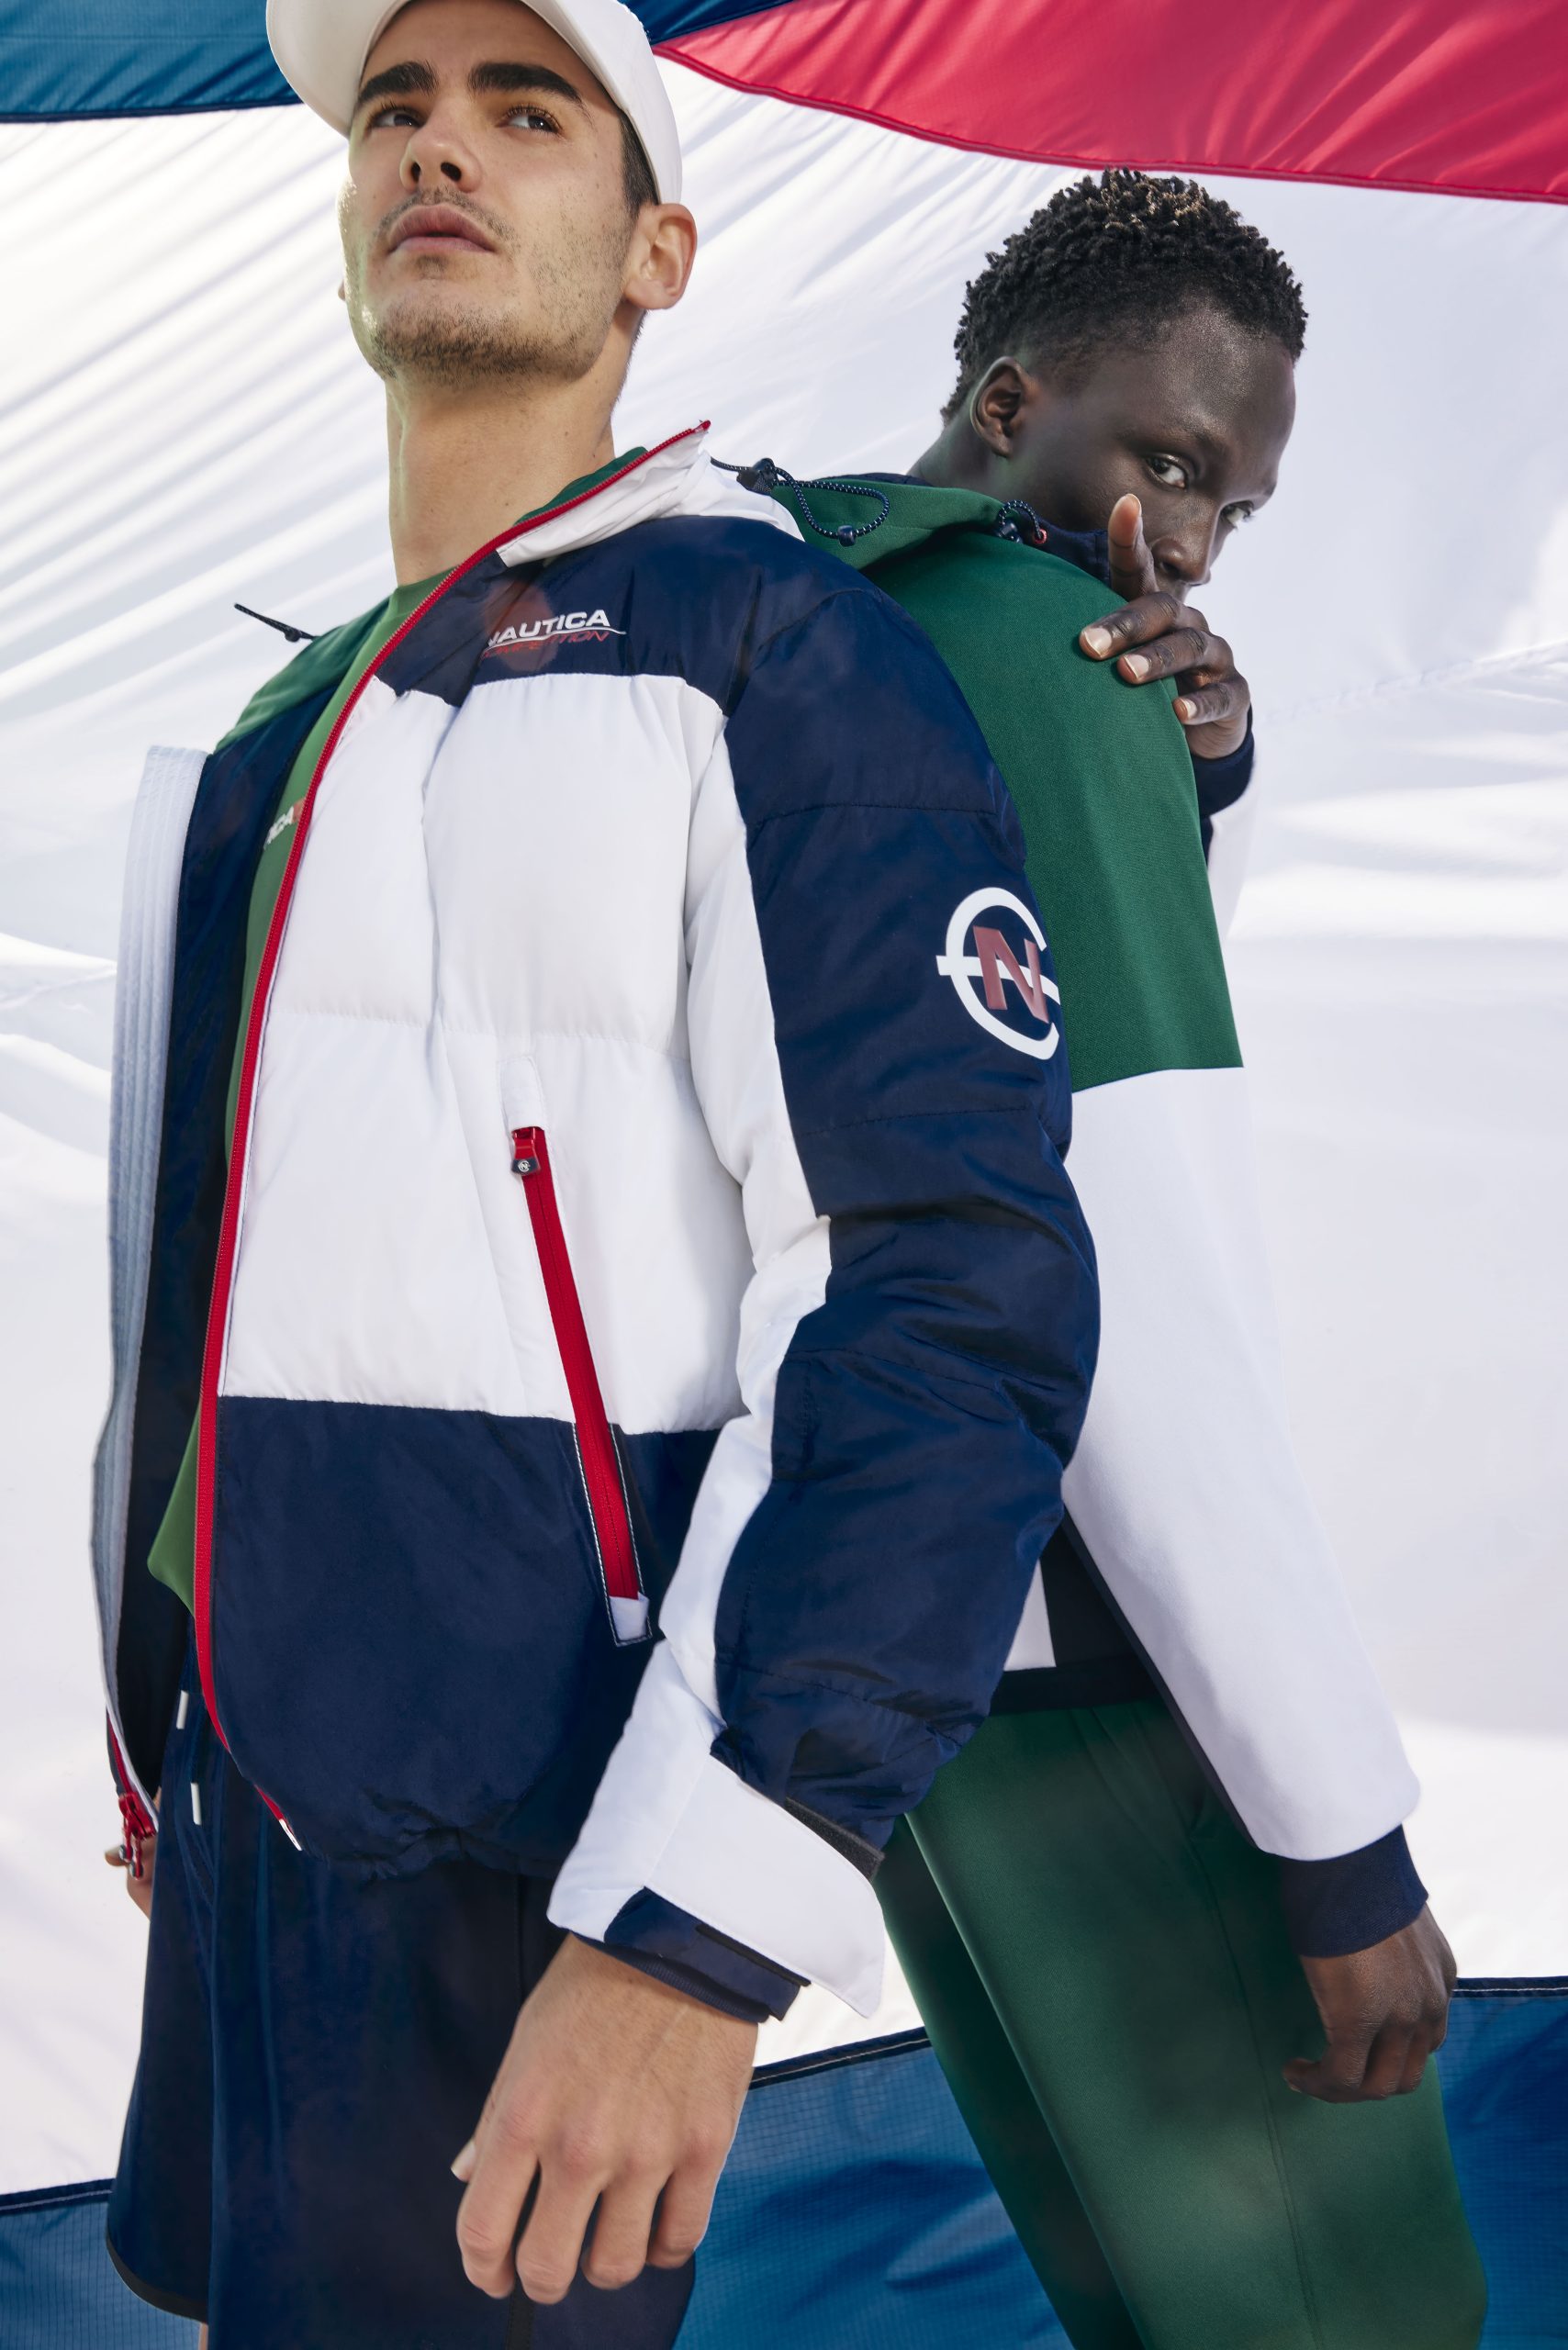 Nautica Fall 2022 Men’s Competition Collection Lookbook | The Impression